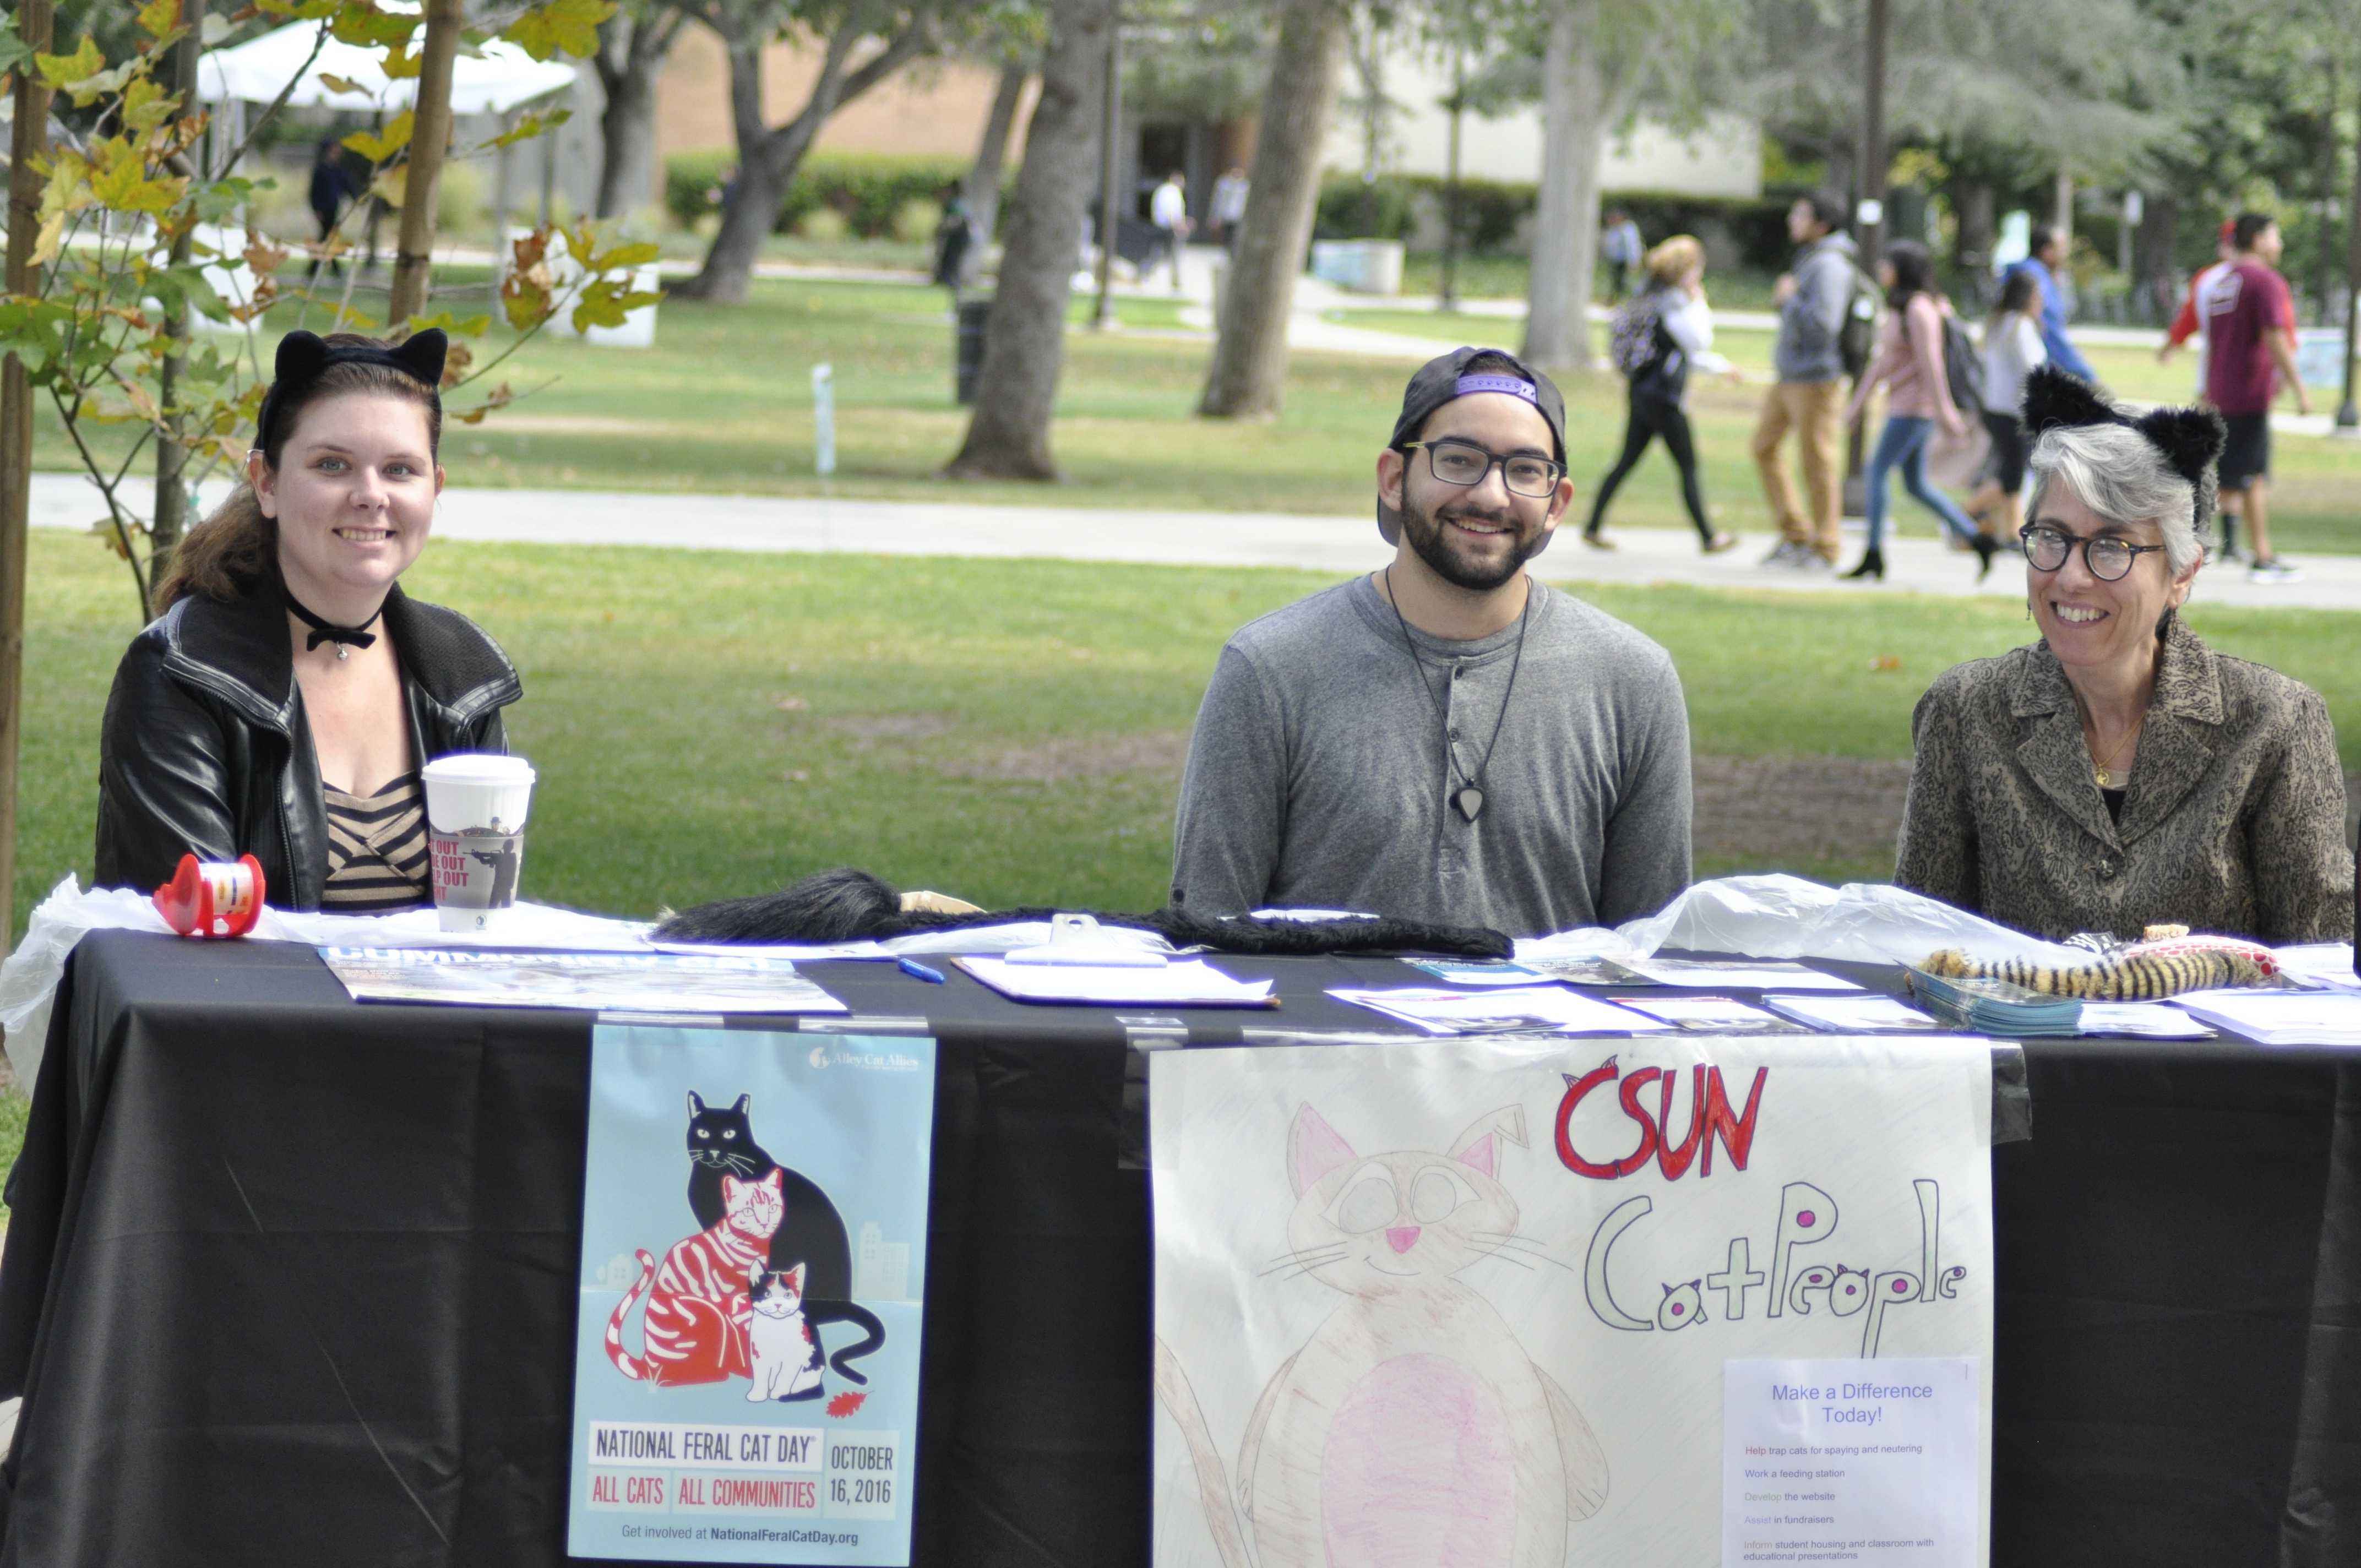 Emily Siffrin, Darian Eskan and CSUN Cat People founder Sabina Magliocco at the National Feral Cat Day Booth on October 17, 2016 in the Oviatt Square Photo credit: Harrison Katz